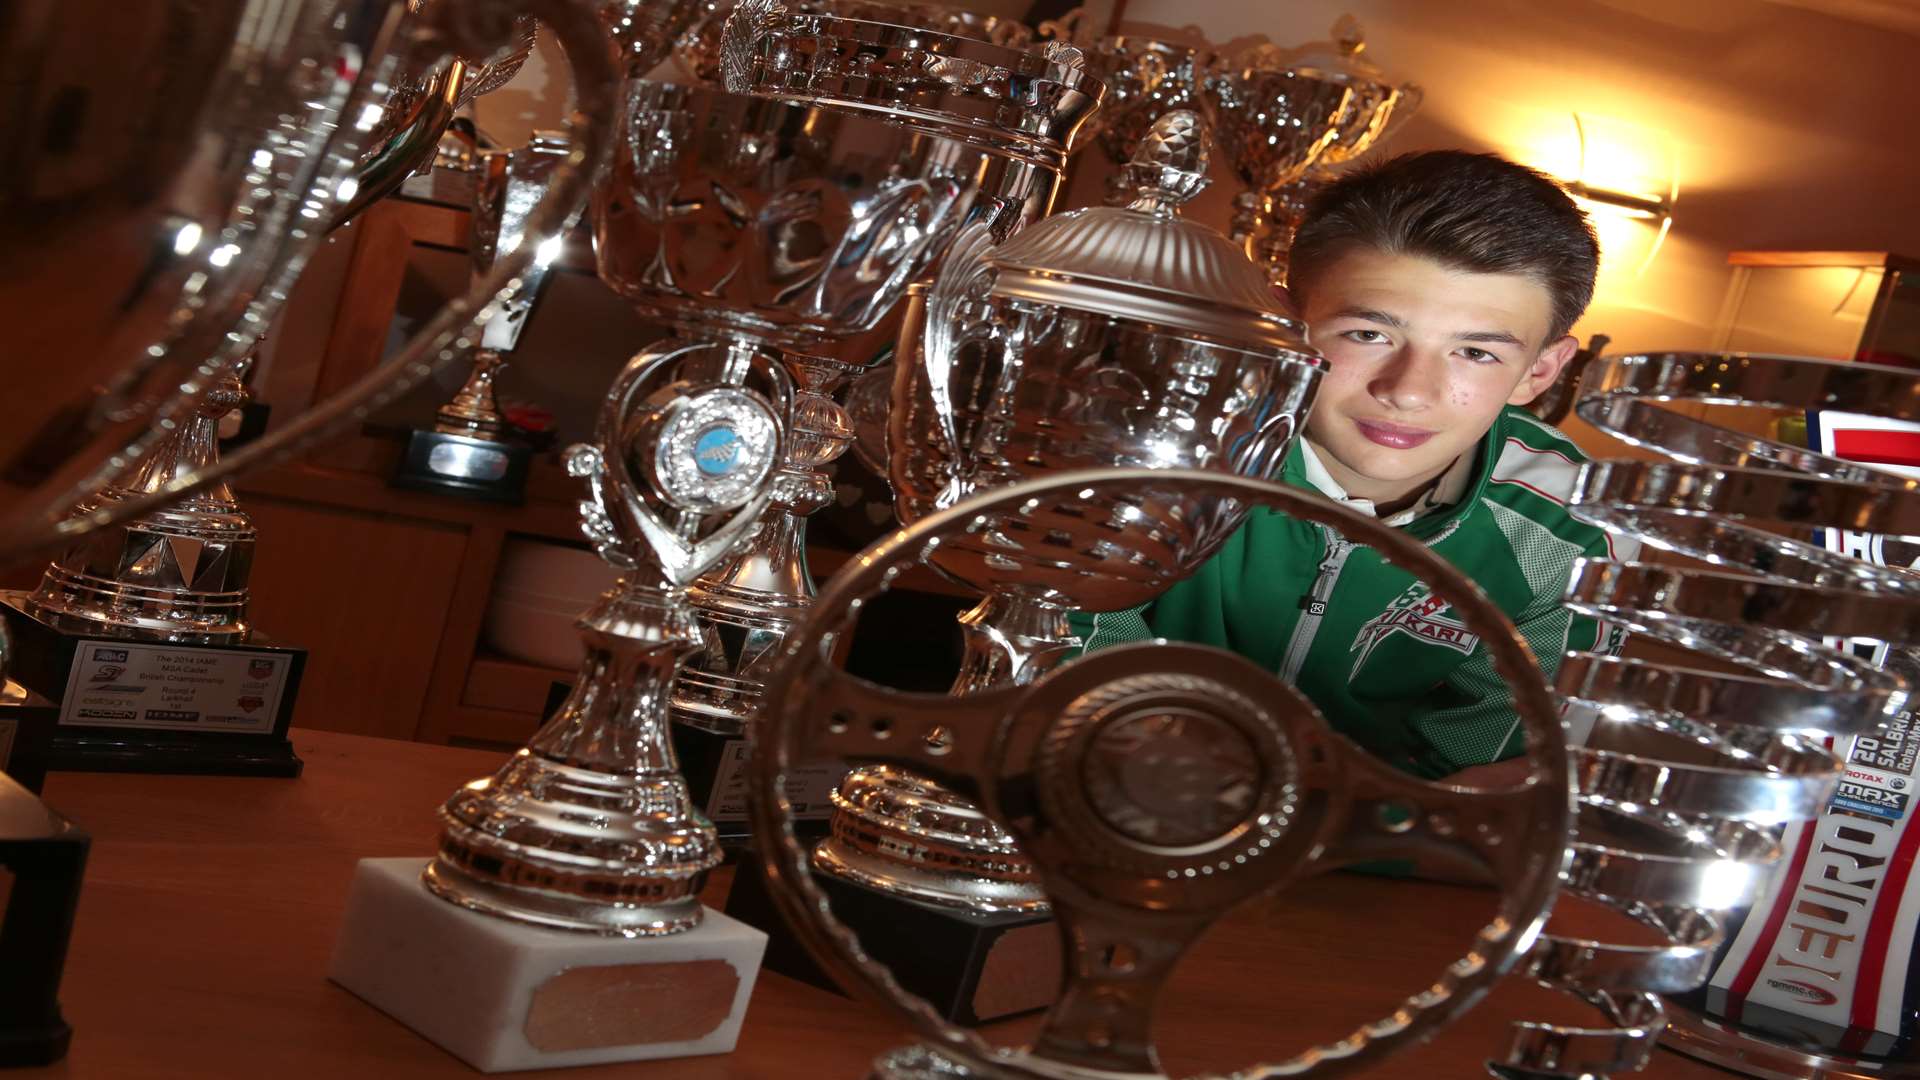 Kiern Jewiss with his karting trophies Picture: Martin Apps